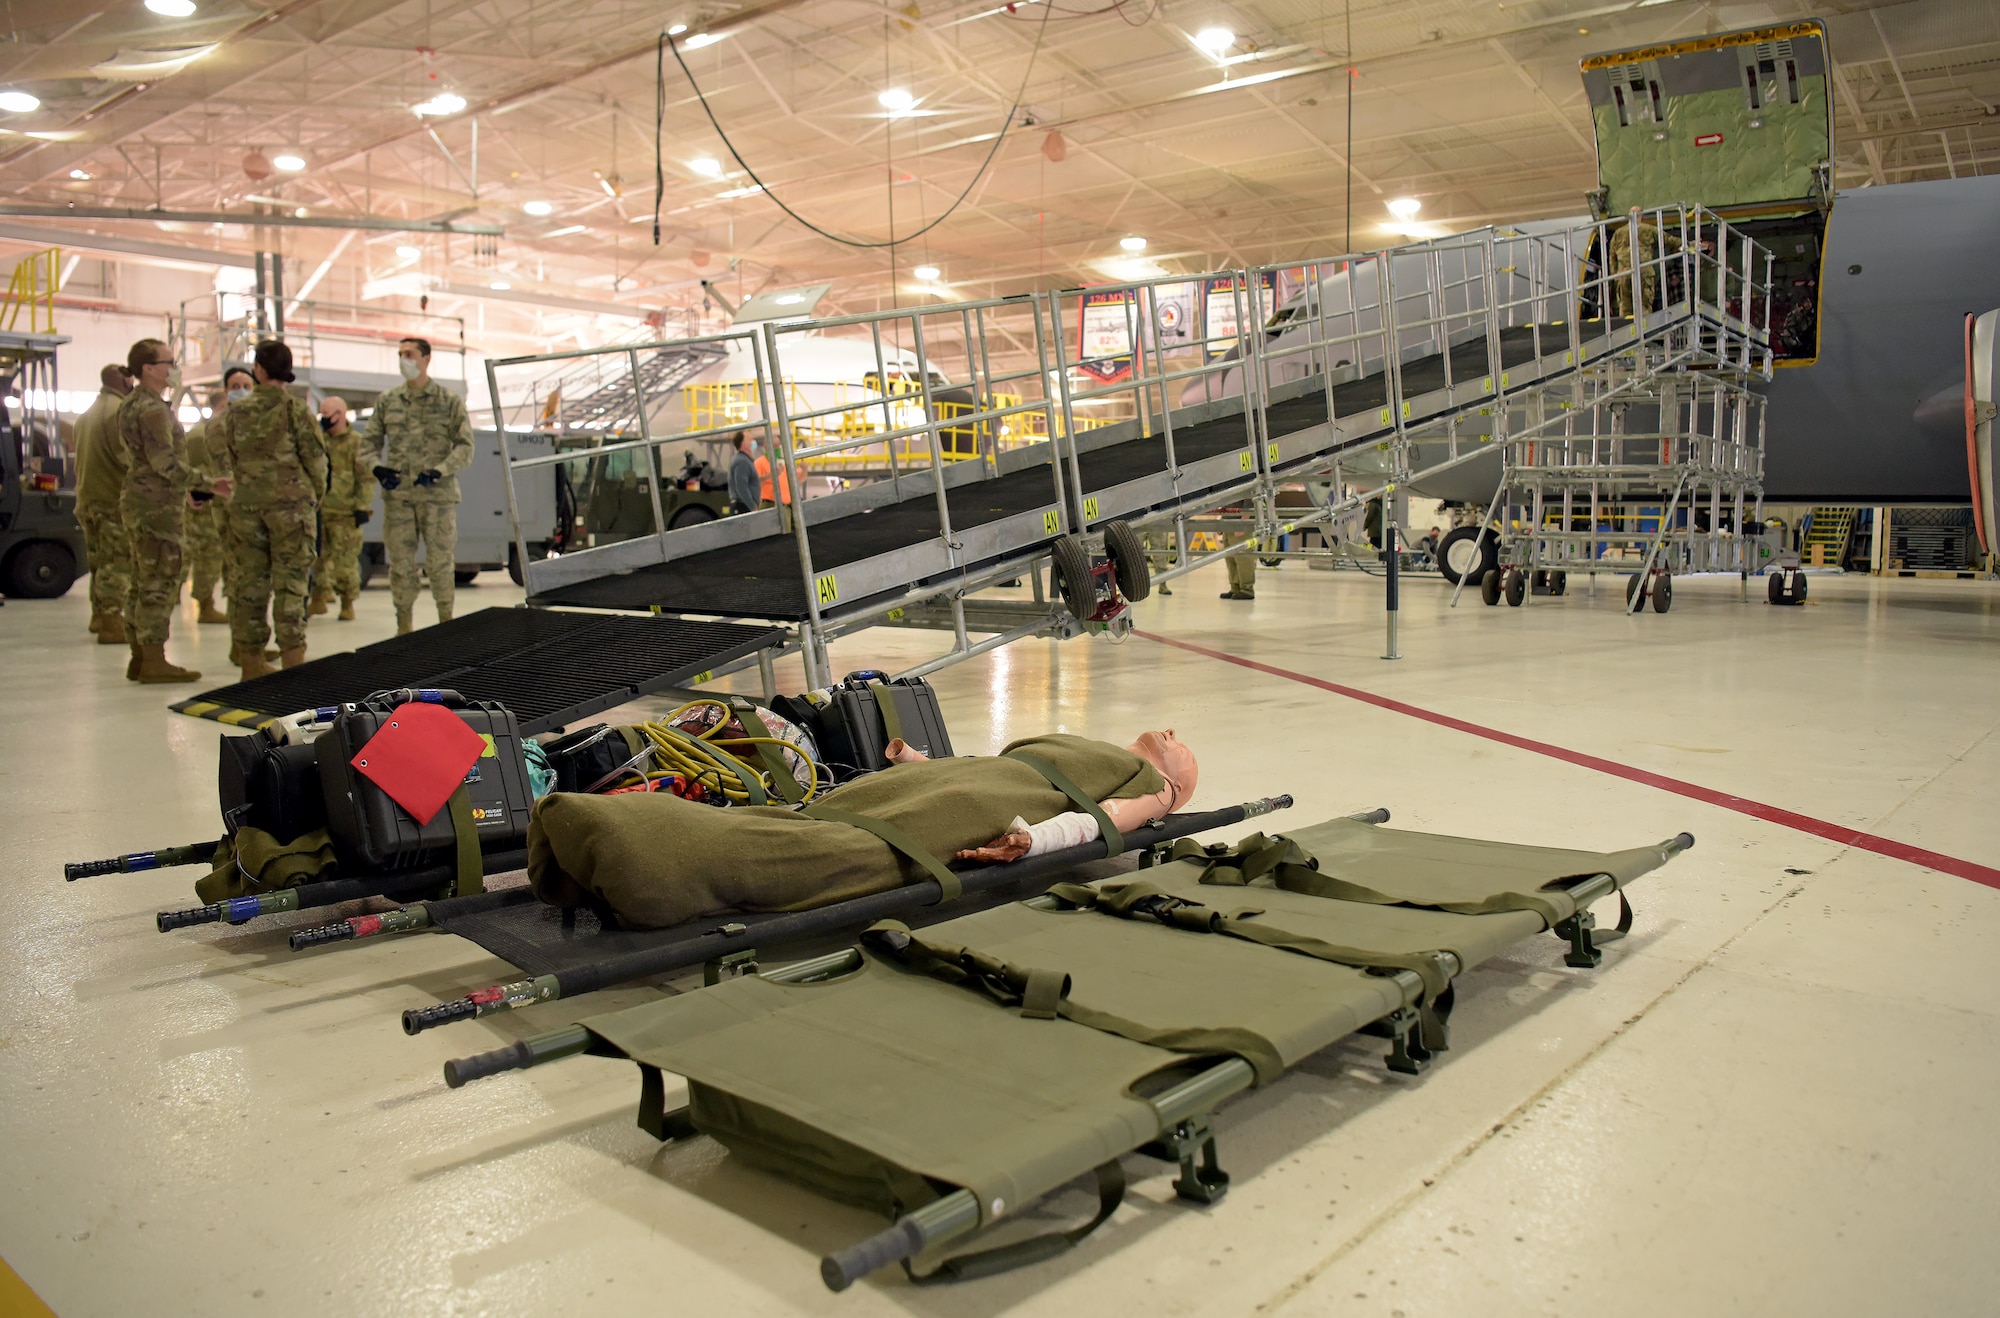 Medical technicians from the 375th Medical Group prepare to transport litters up a newly constructed Patient Loading System at Scott Air Force Base, Illinois, Jan. 26, 2021. The PLS is a portable and constructable ramp used to safely on- and off-load patients to high-deck aircraft, such as the KC-10 Extender, KC-46 Pegasus and KC-135 Stratotanker. (U.S. Air Force photo by Master Sgt. R.J. Biermann)